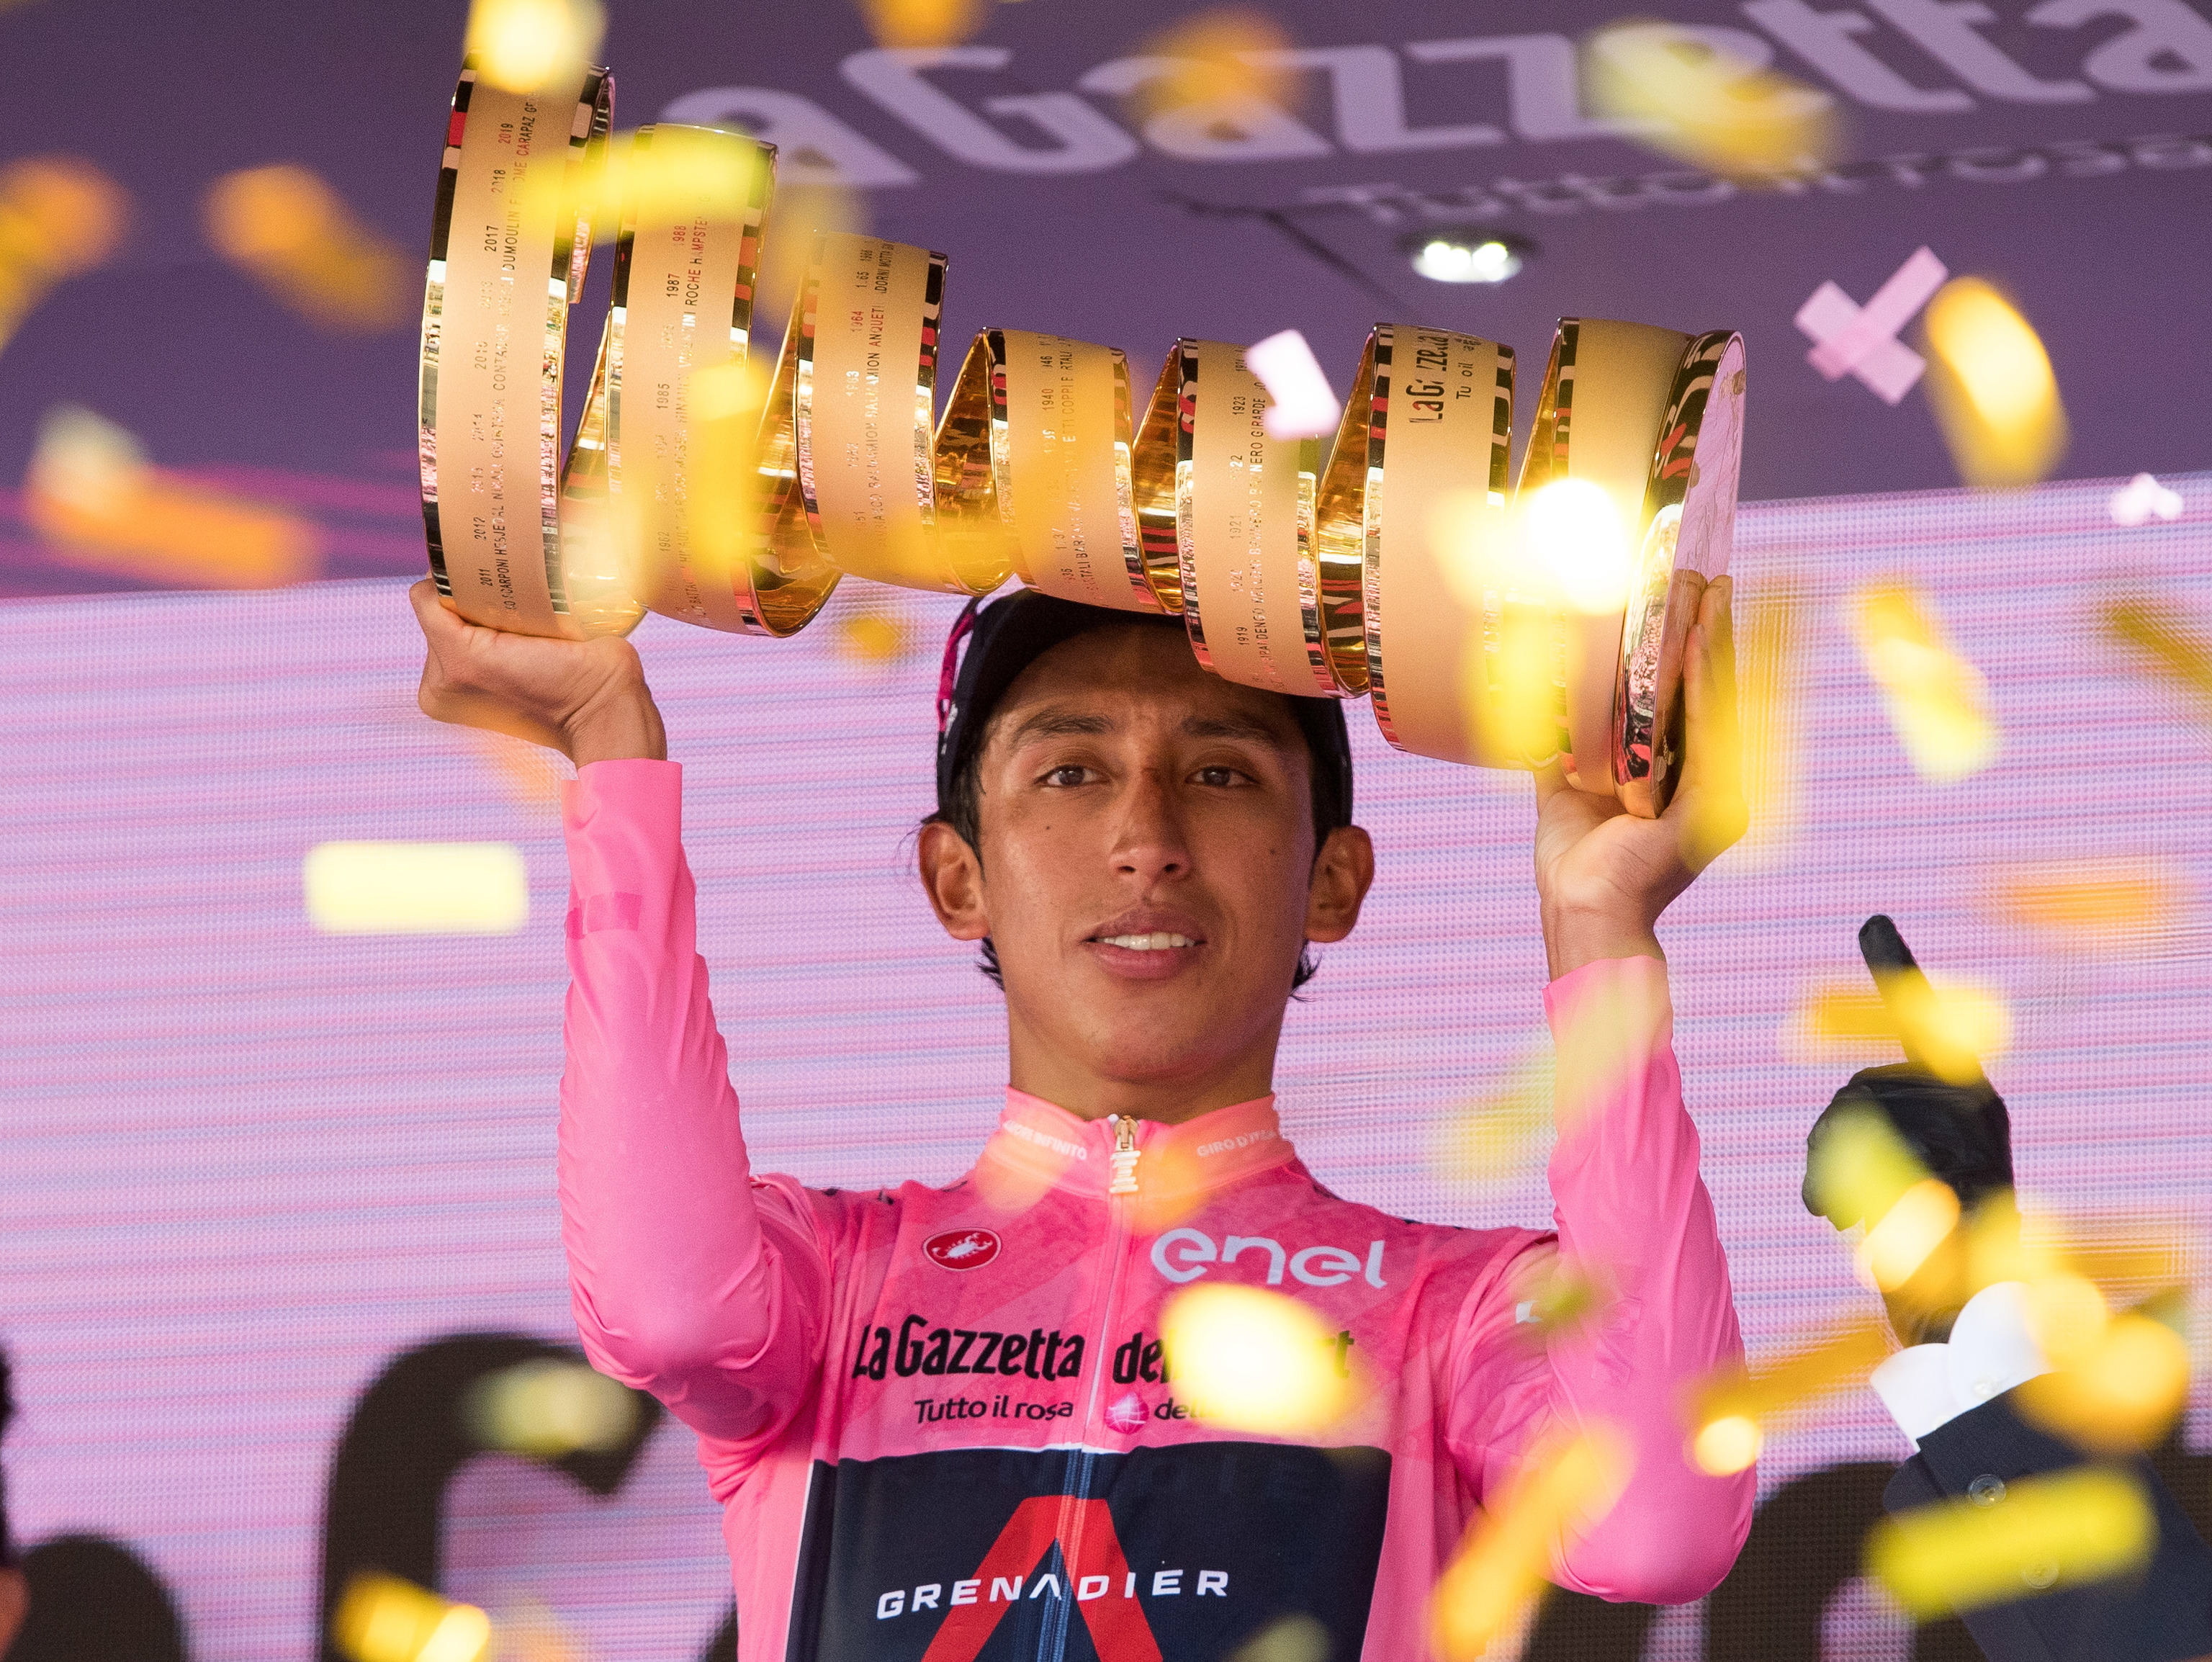 Egan Bernal announced a new social project to “make Colombia a better country”